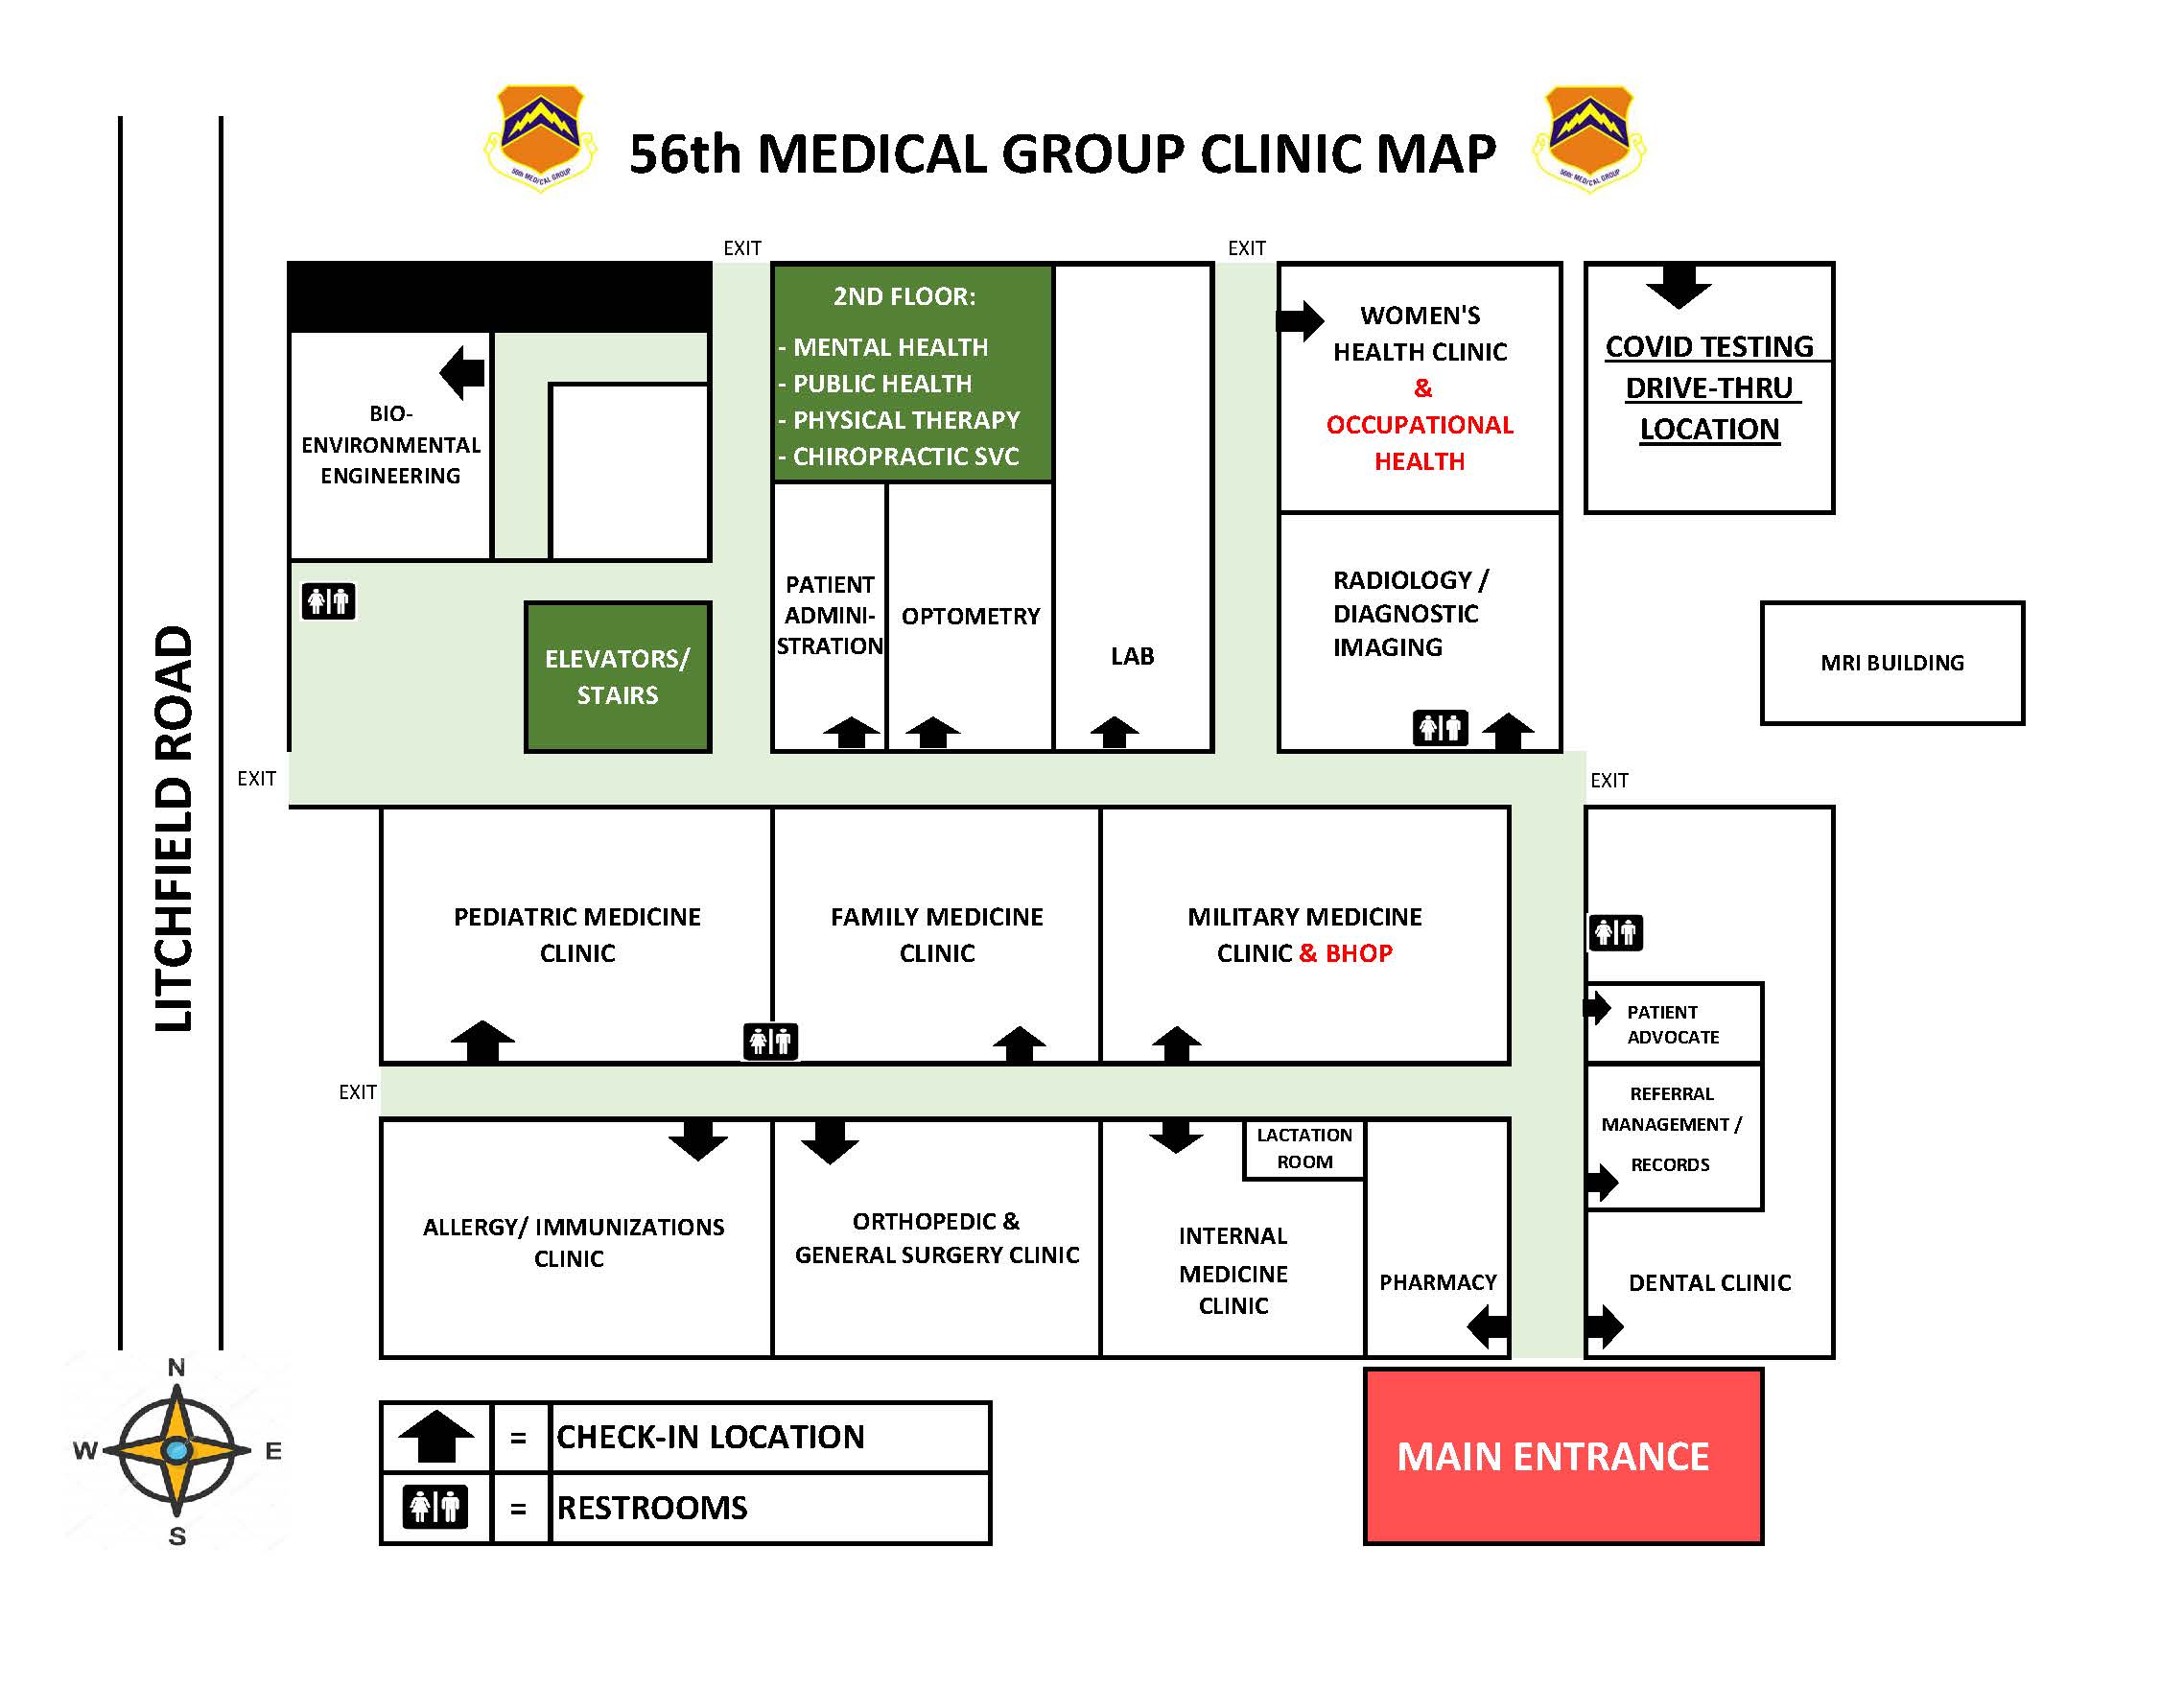 56th Medical Group Clinic Map